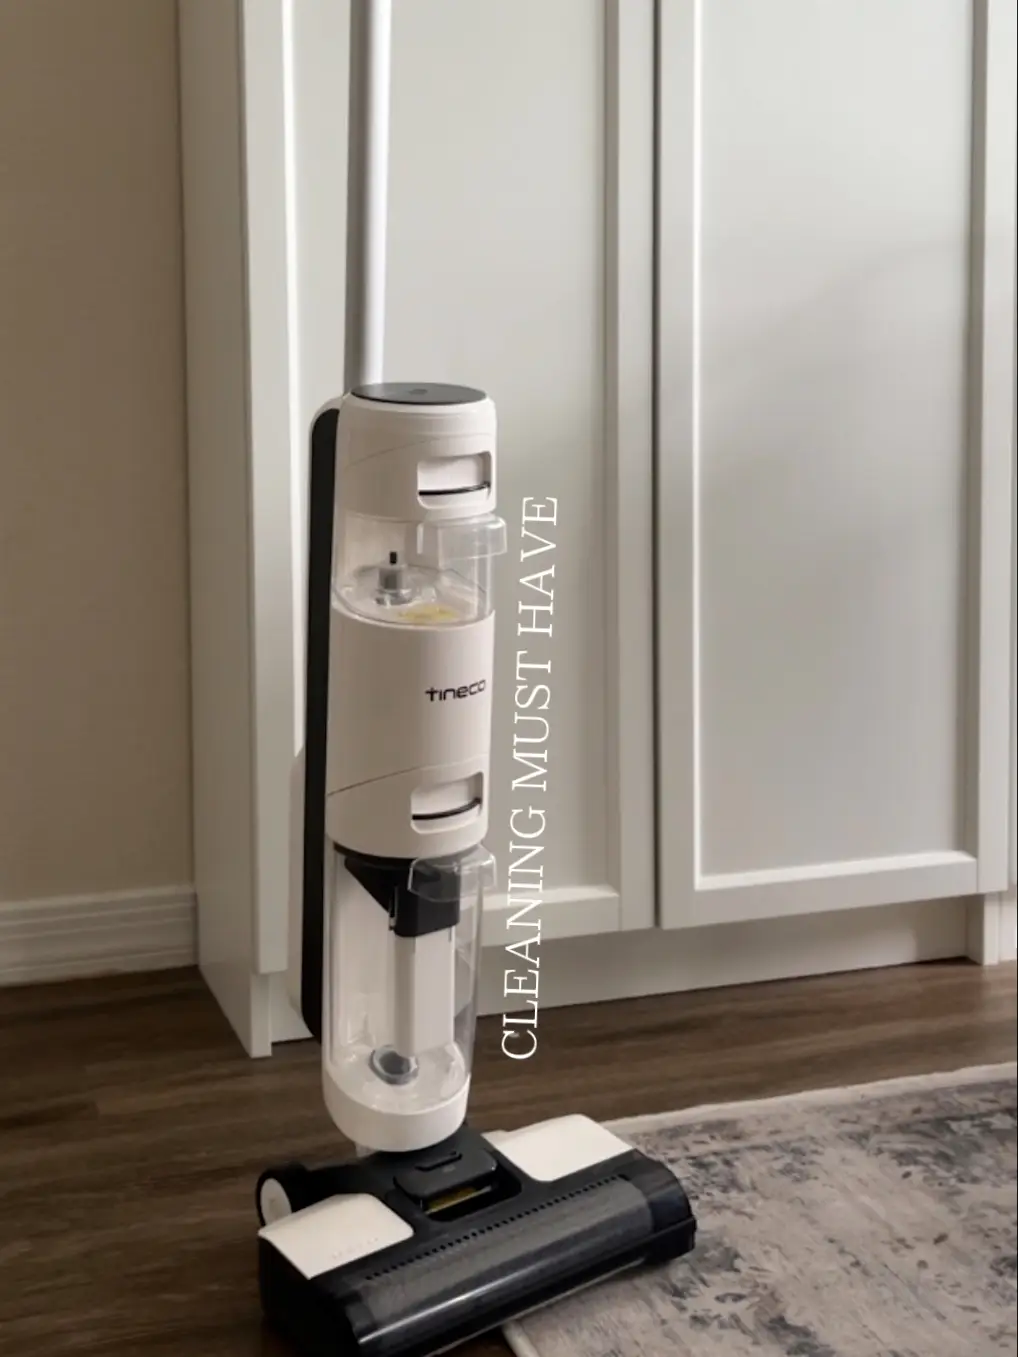 Love it or hate it?— The Tineco vacuum mop✨, Gallery posted by  itsnicandrea